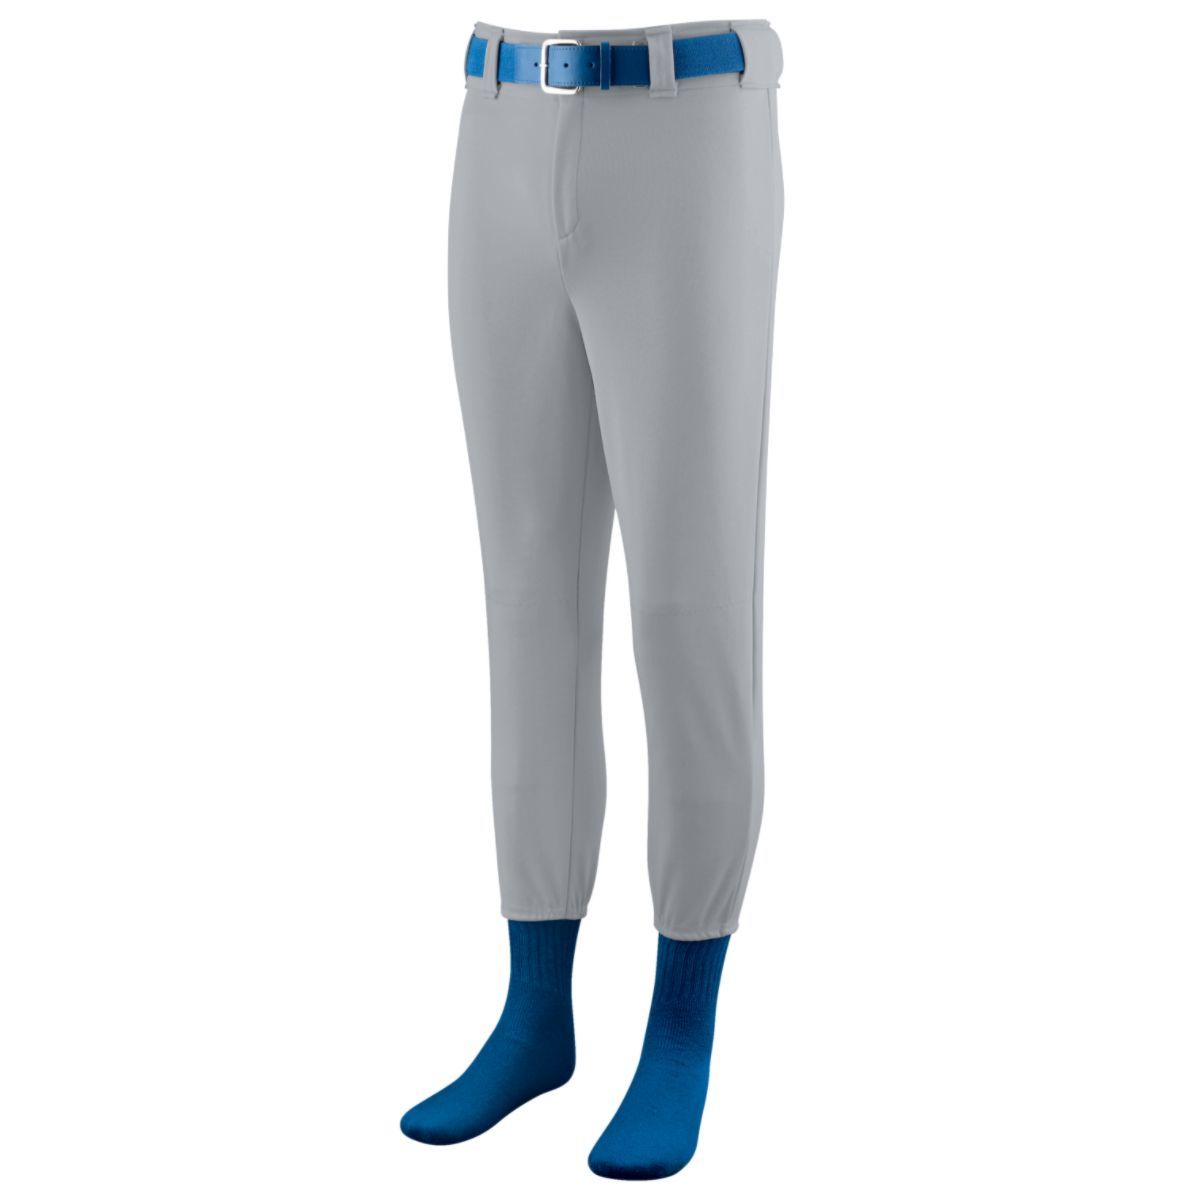 Augusta Sportswear Softball/Baseball Pant in Silver Grey  -Part of the Adult, Adult-Pants, Pants, Augusta-Products, Softball product lines at KanaleyCreations.com